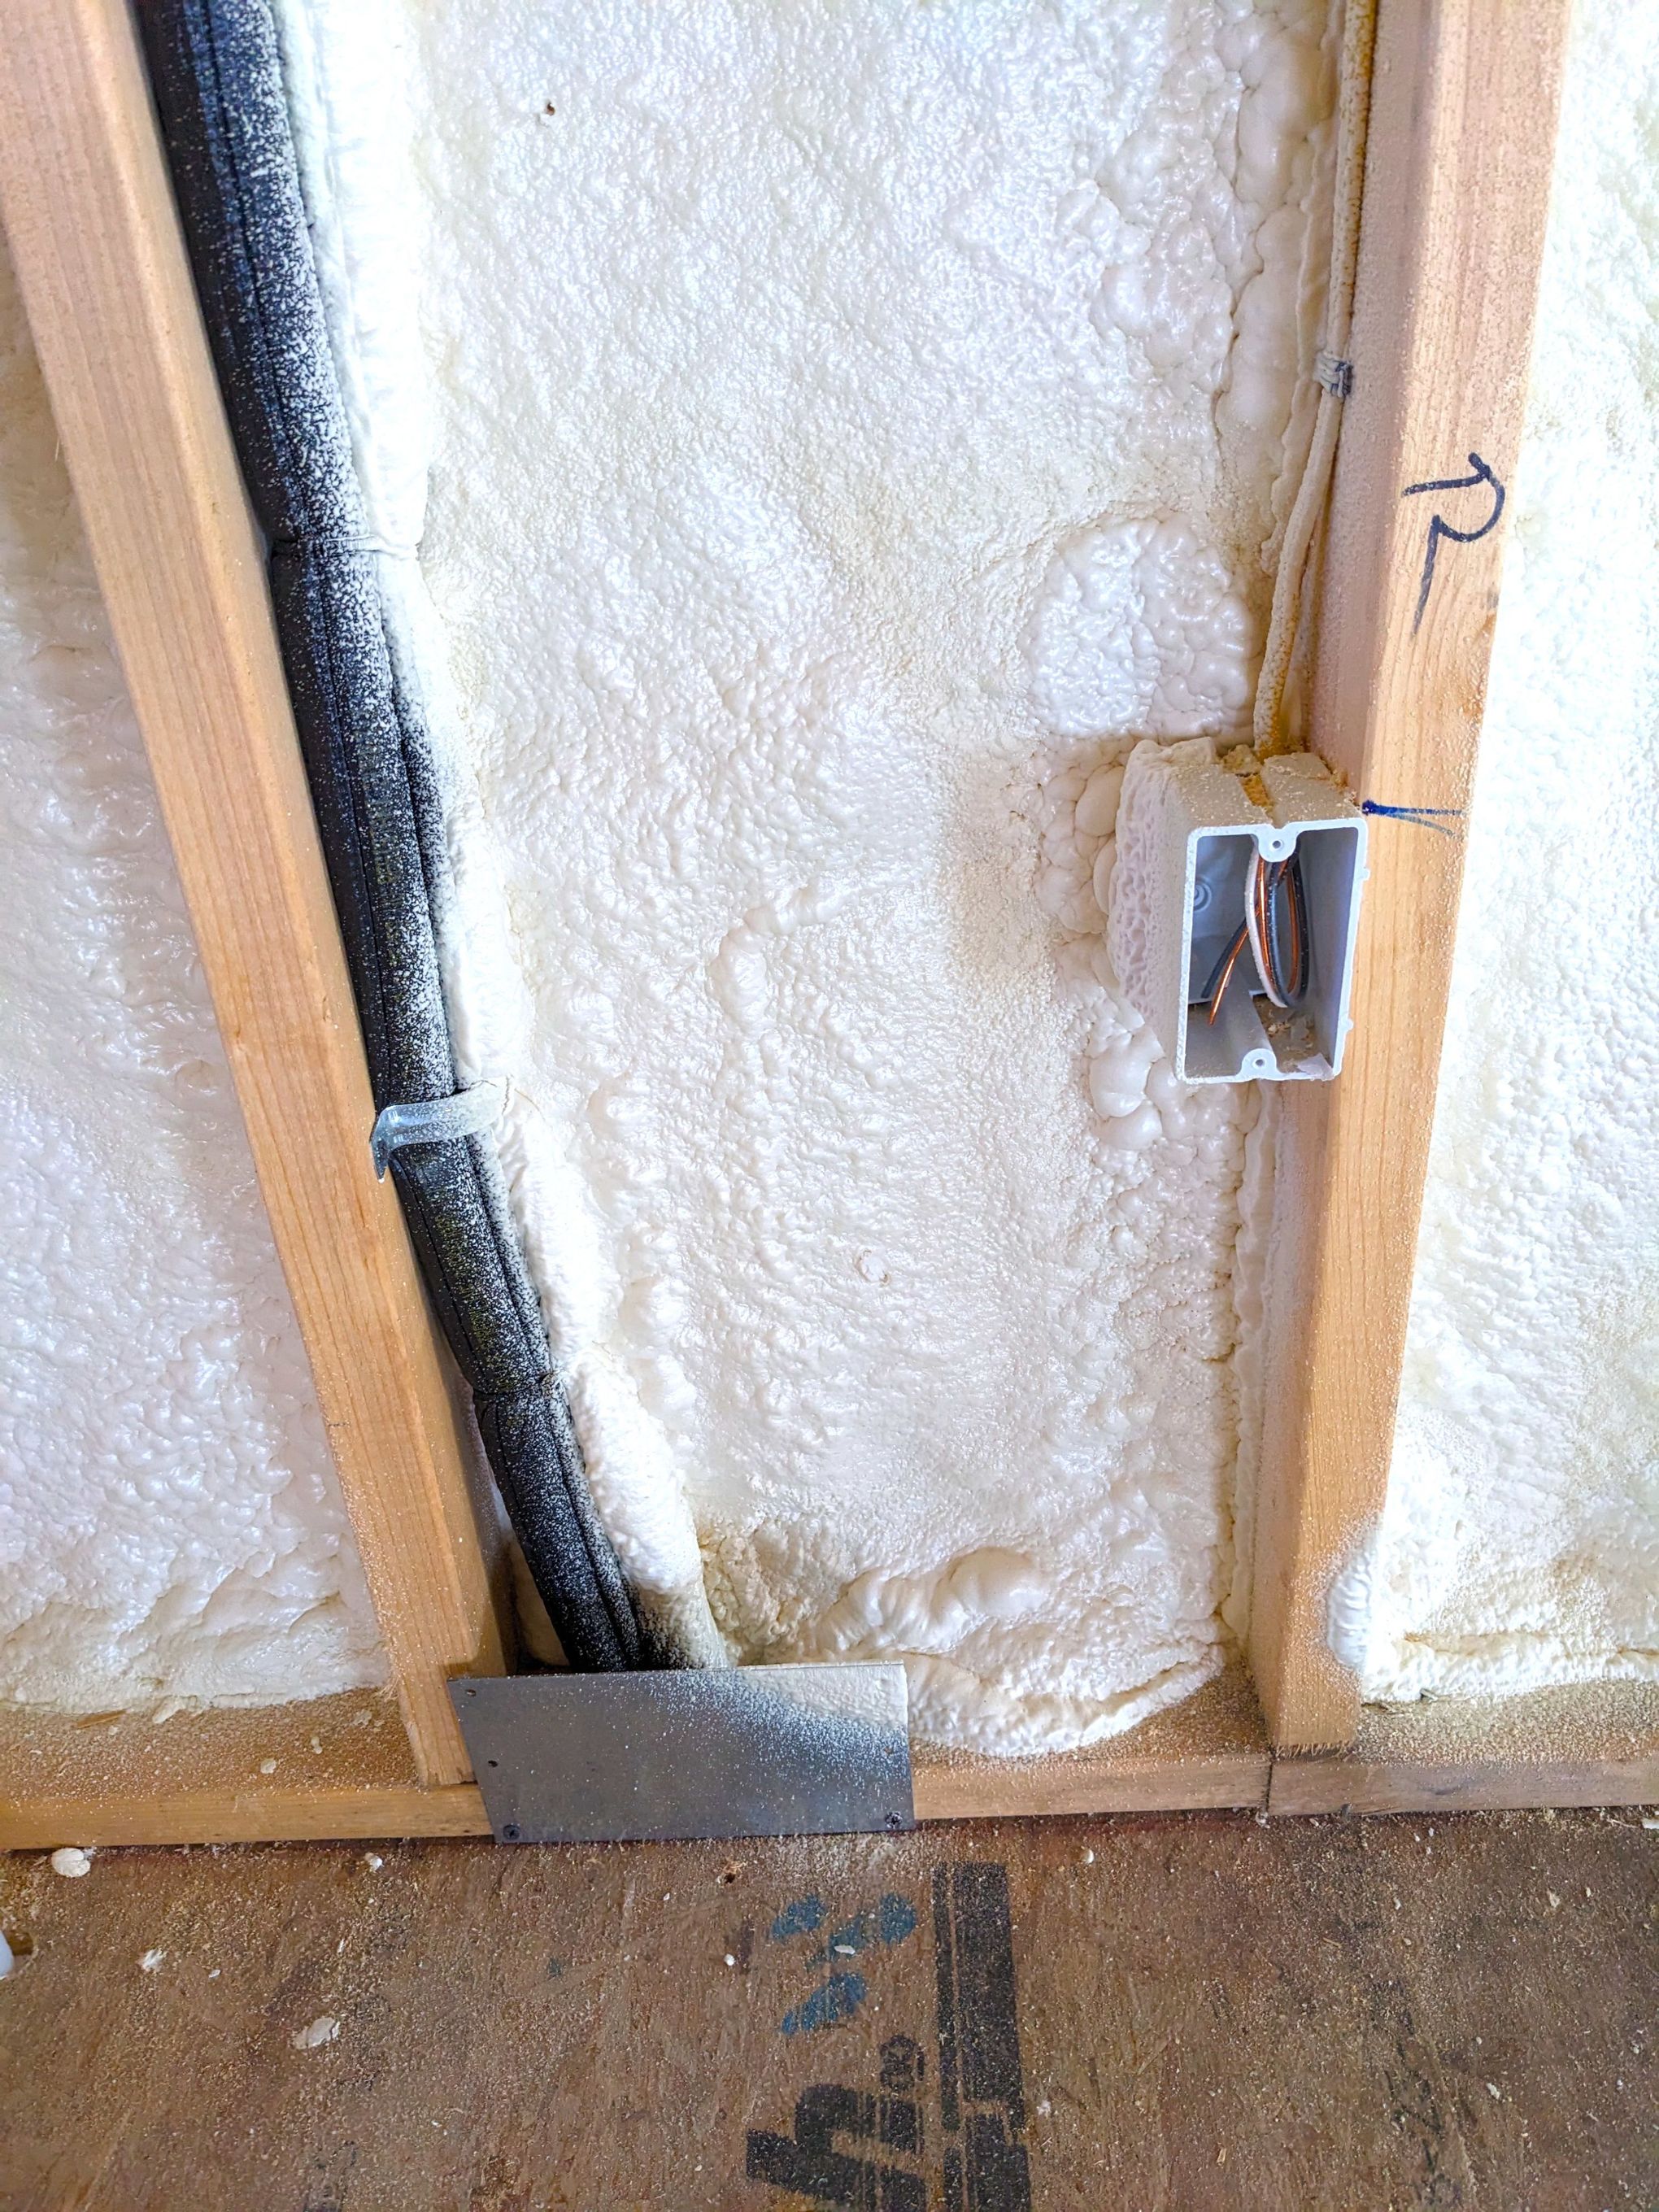 Denim Insulation Pros & Cons - Is it Right for You?